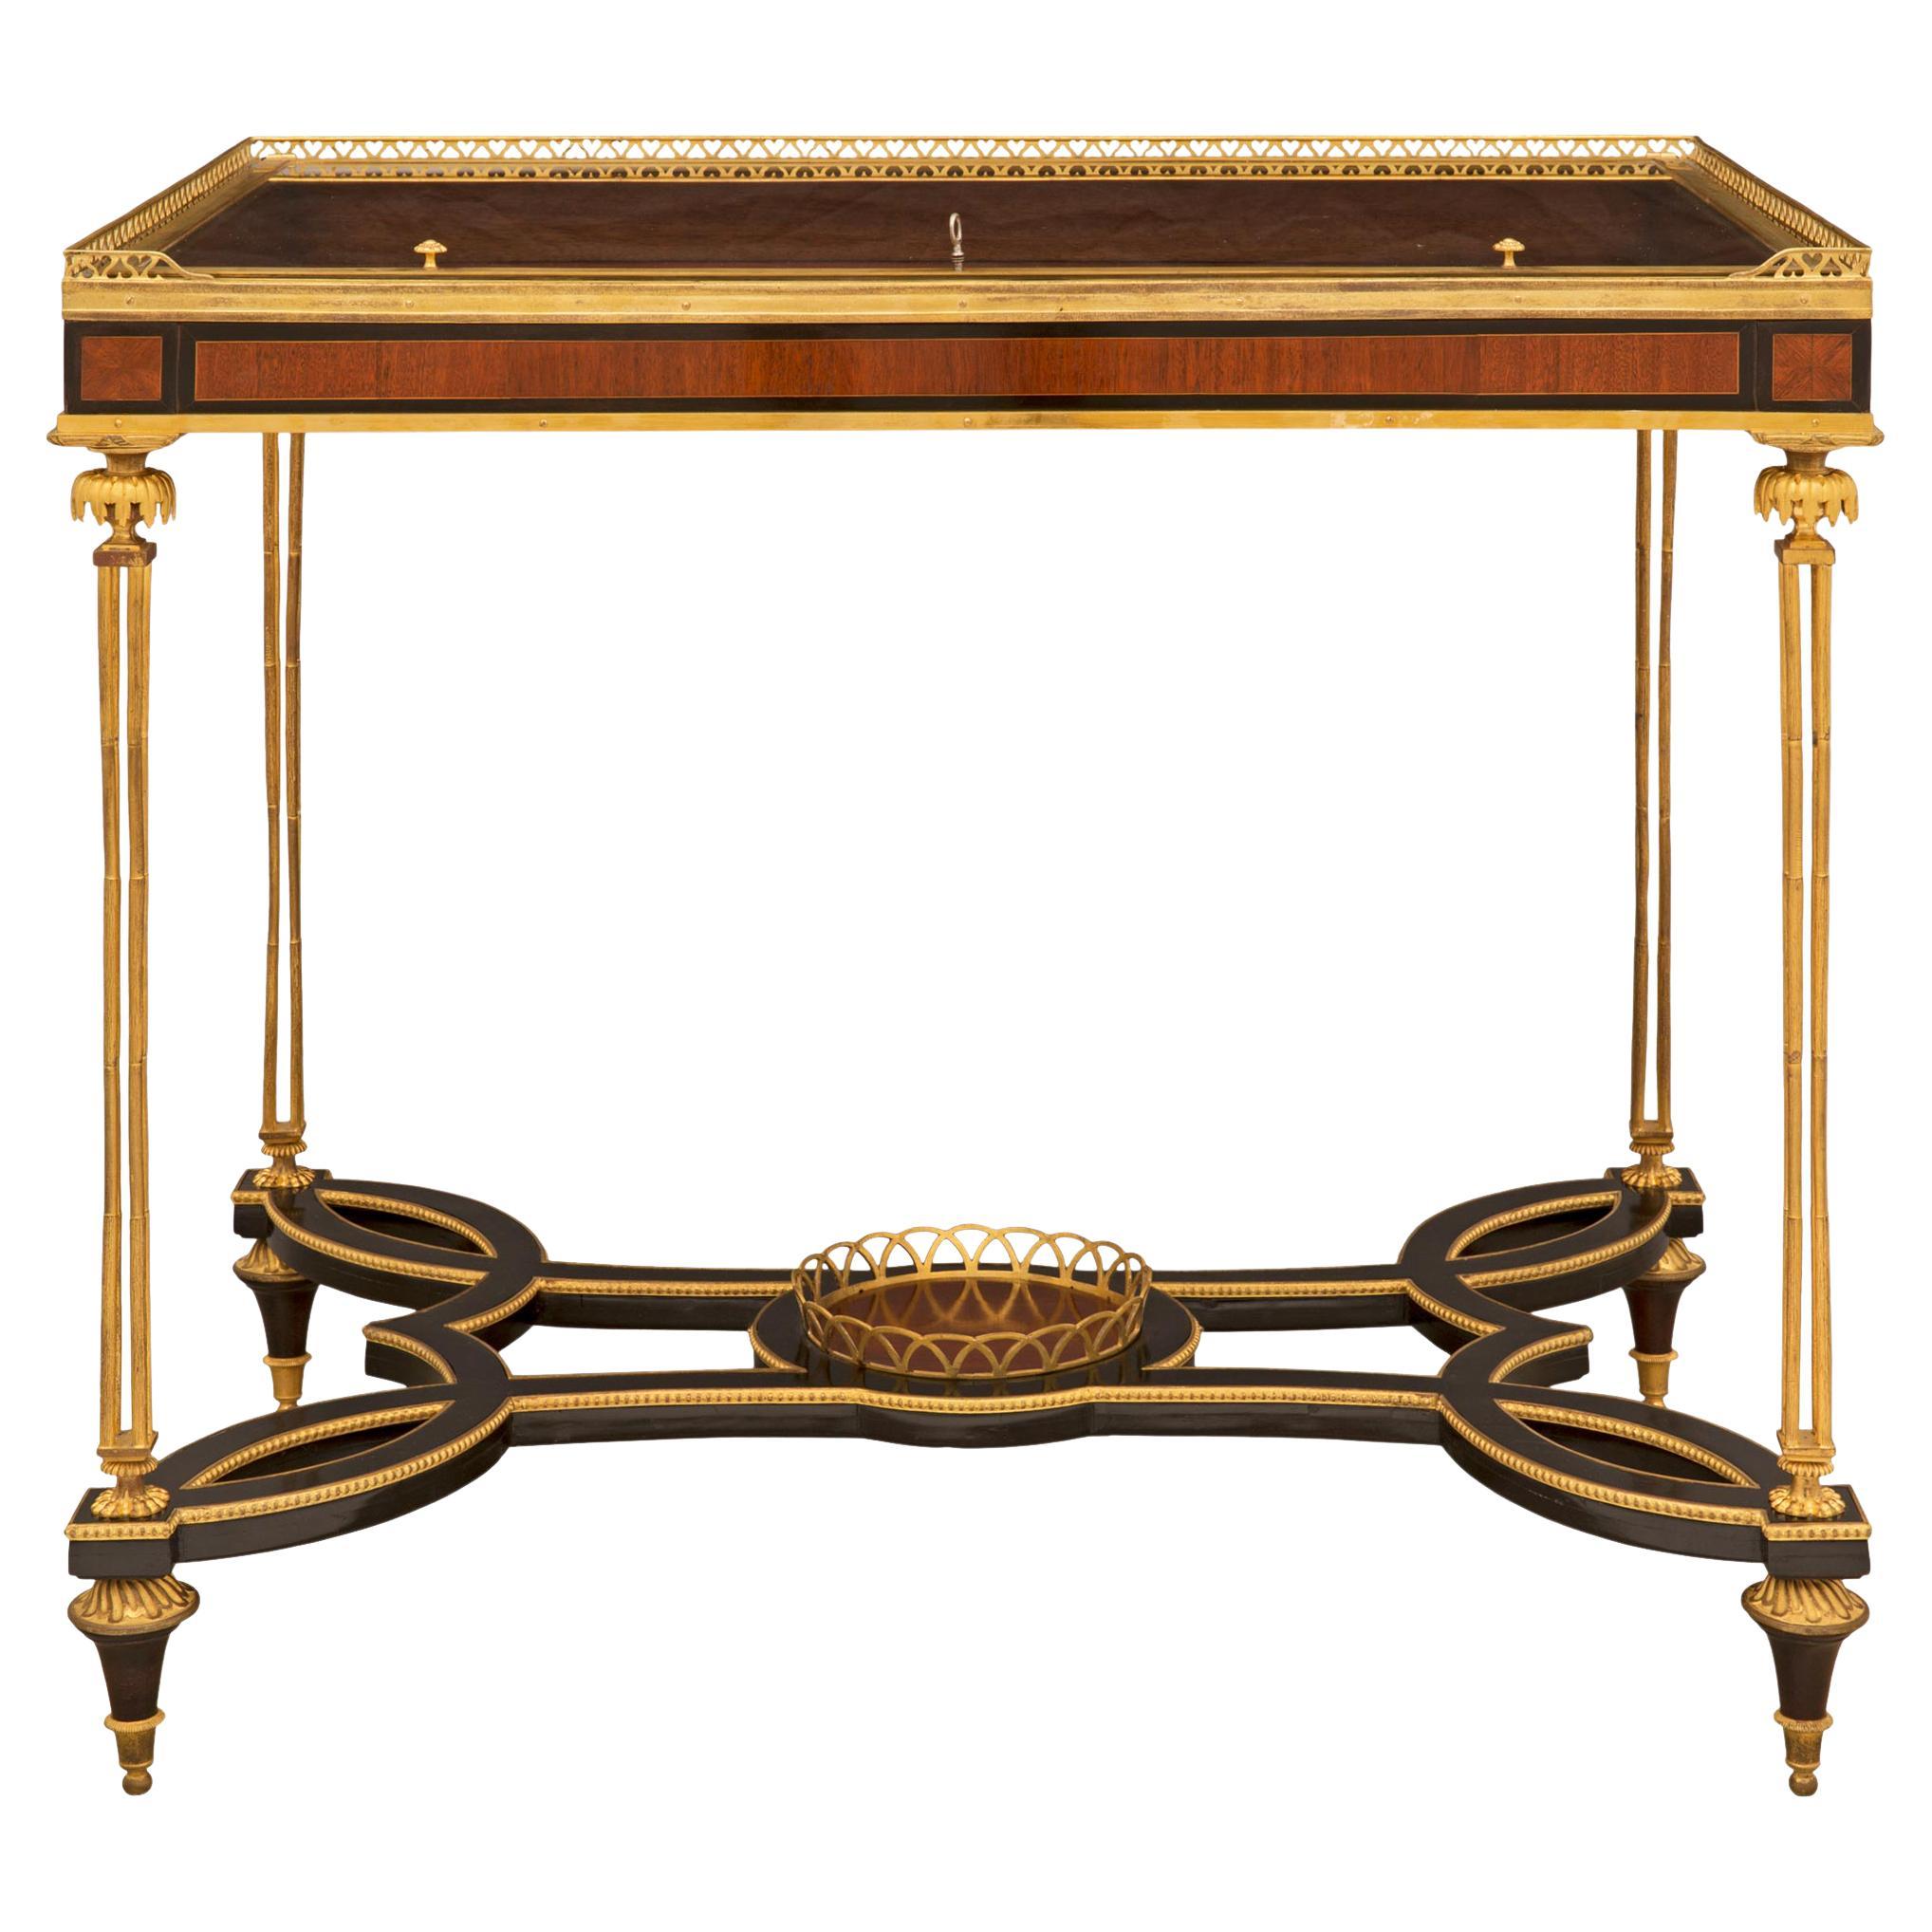 French Mid-19th Century Louis XVI Style Kingwood and Ormolu Display Table For Sale